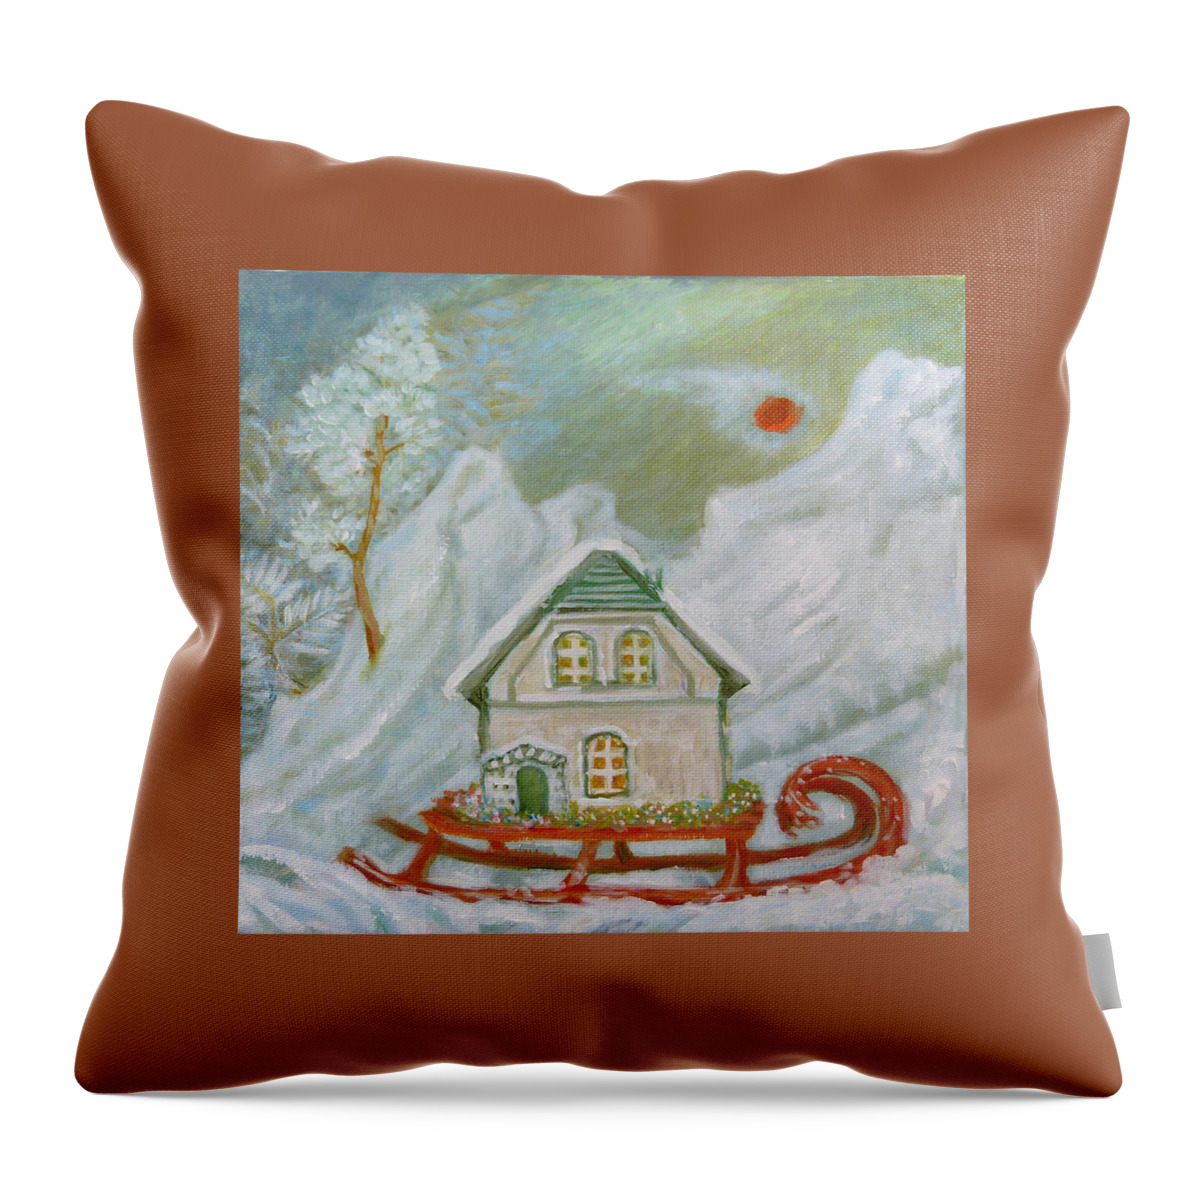 Little Winter Throw Pillow featuring the painting Little winter by Elzbieta Goszczycka